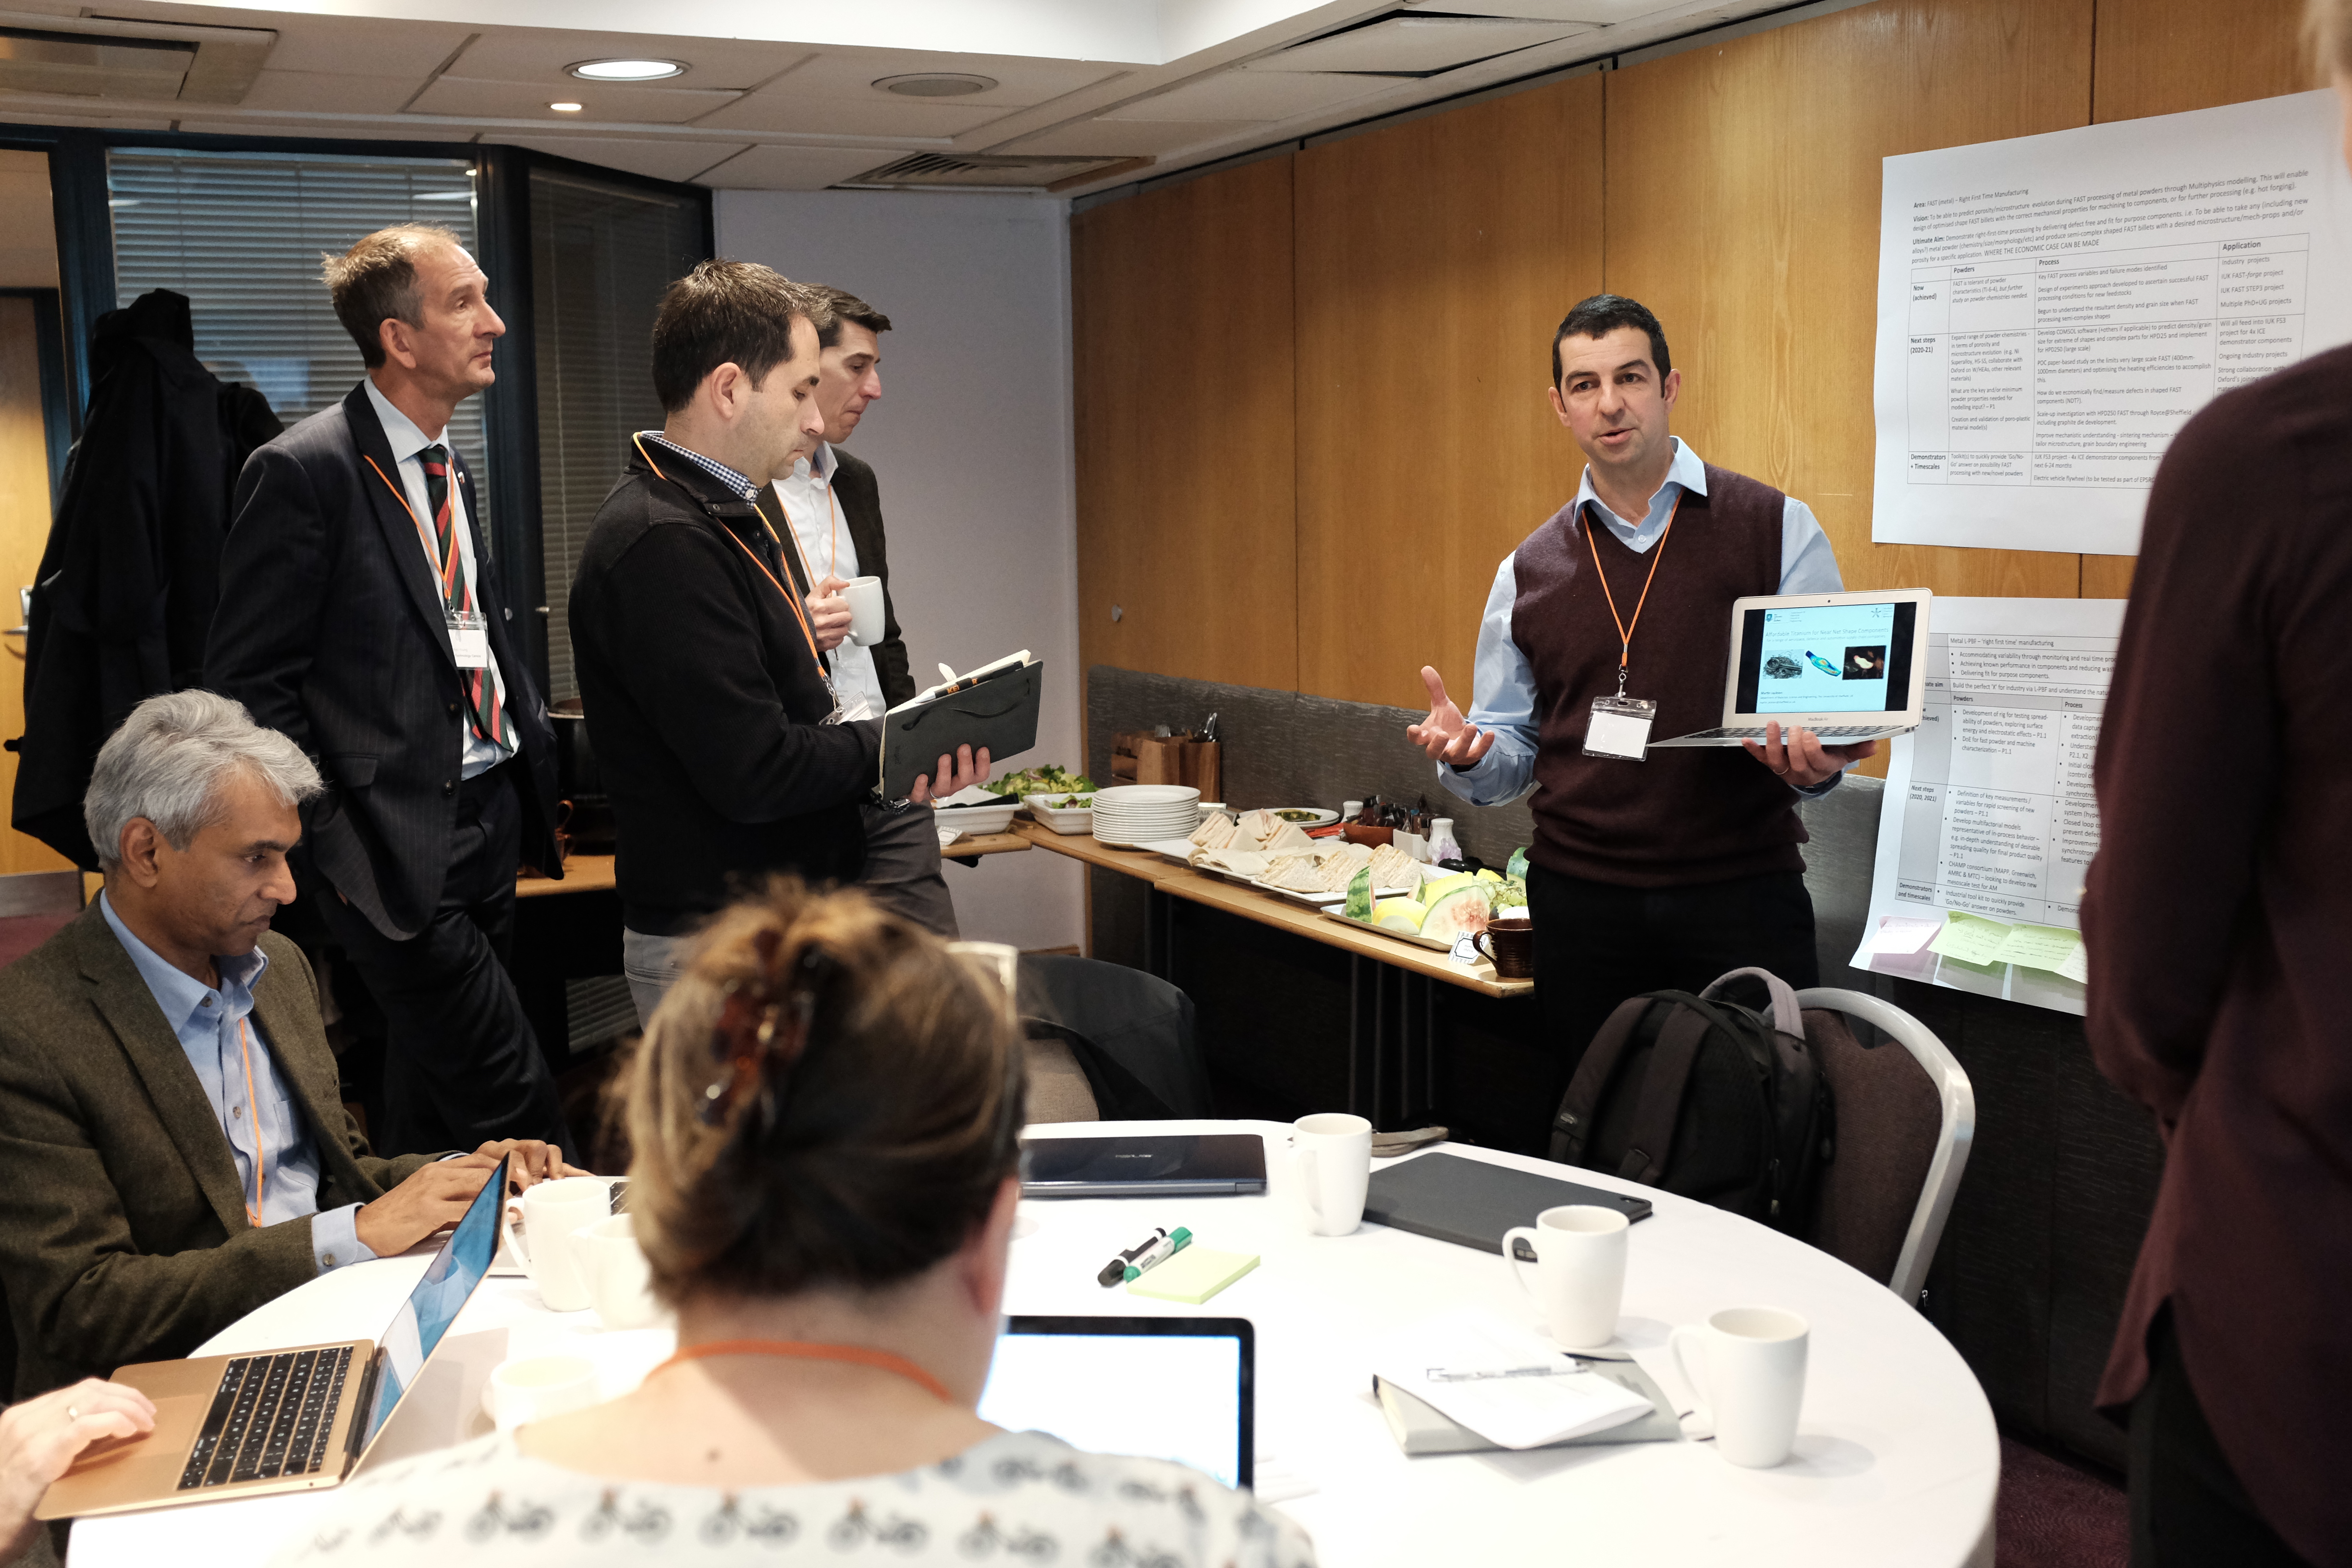 Prof. Martin Jackson leads discussions at the November 2019 Industry Partner Workshop - Prof. Martin Jackson, MAPP, The University of Sheffield, Department of Materials Science and Engineering, leads discussions at the November 2019 Industry Partner Workshop with colleagues.